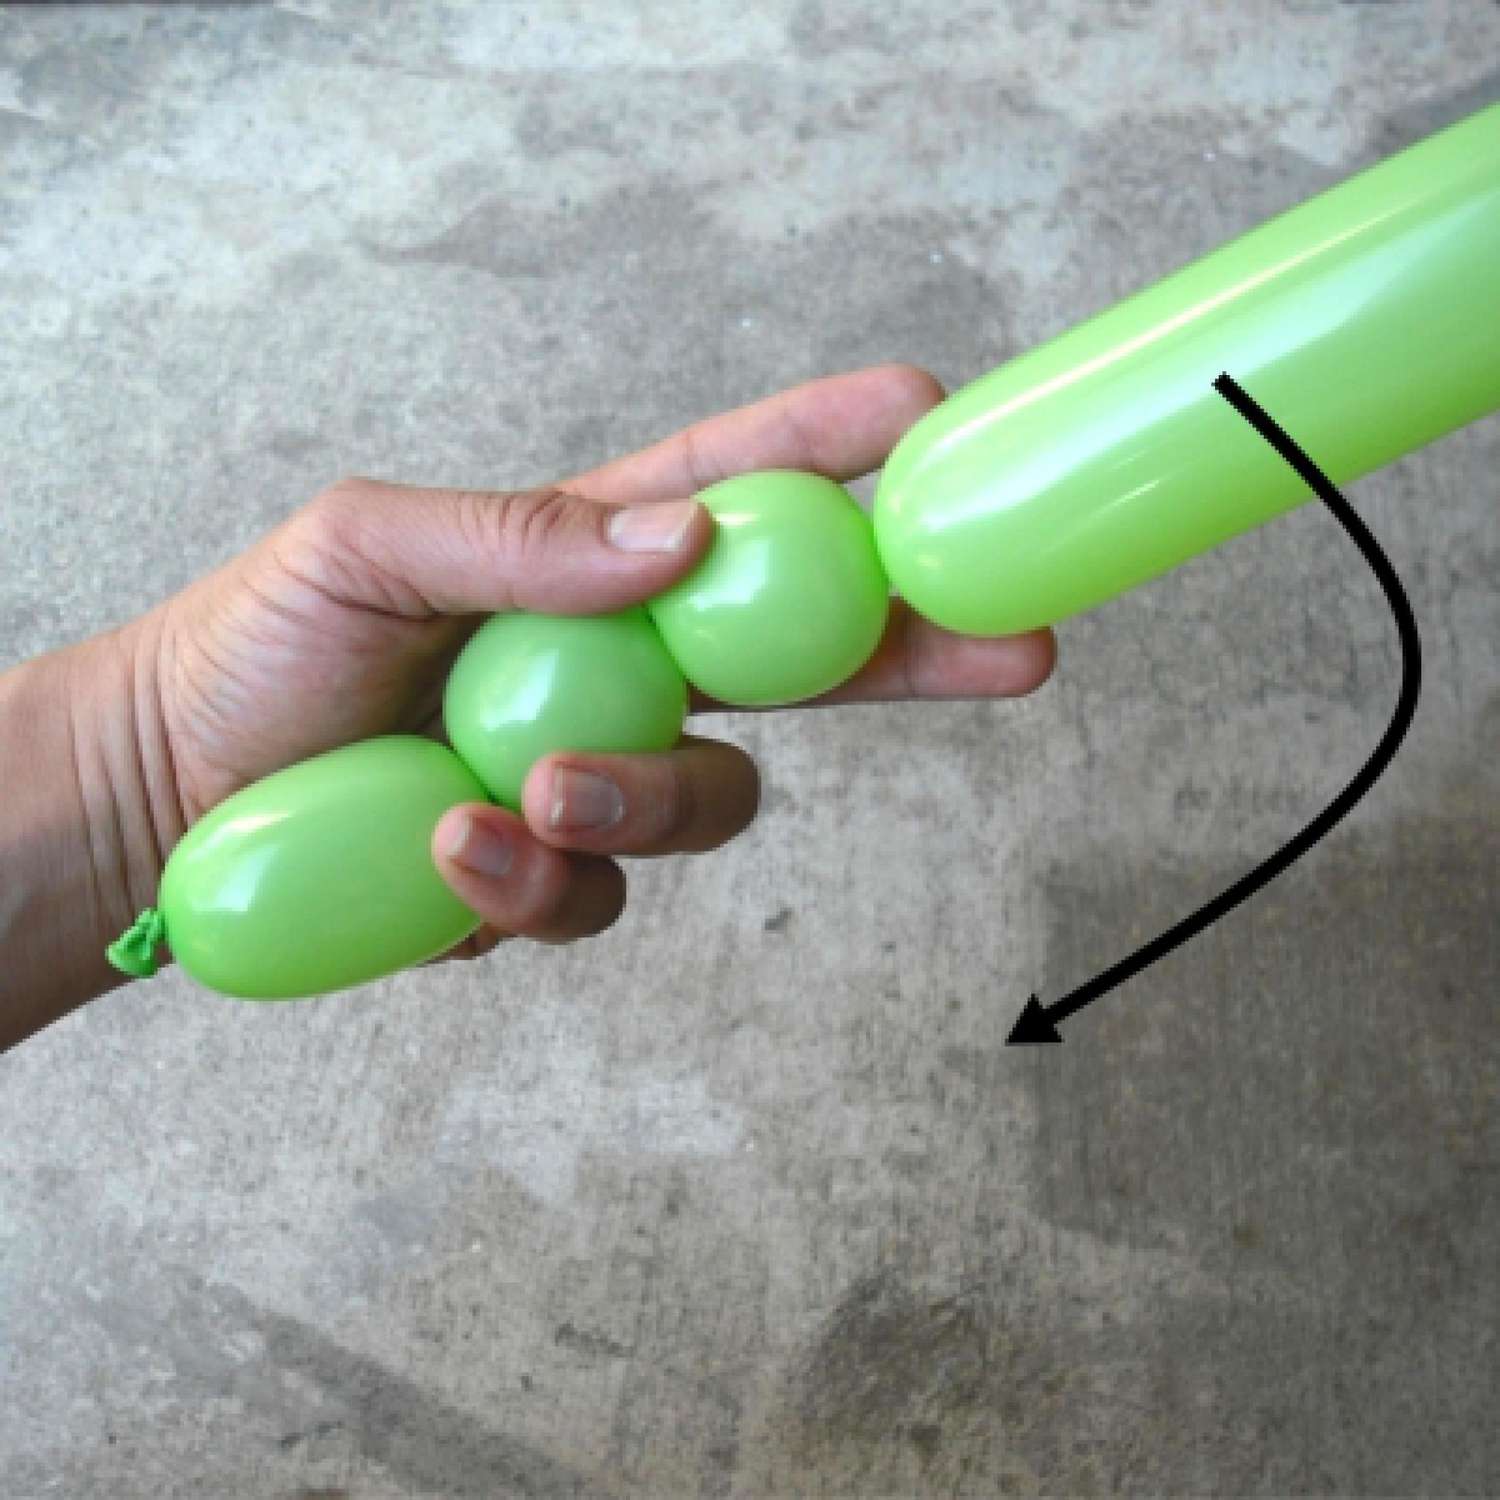 Person demonstrating how to twist a balloon.